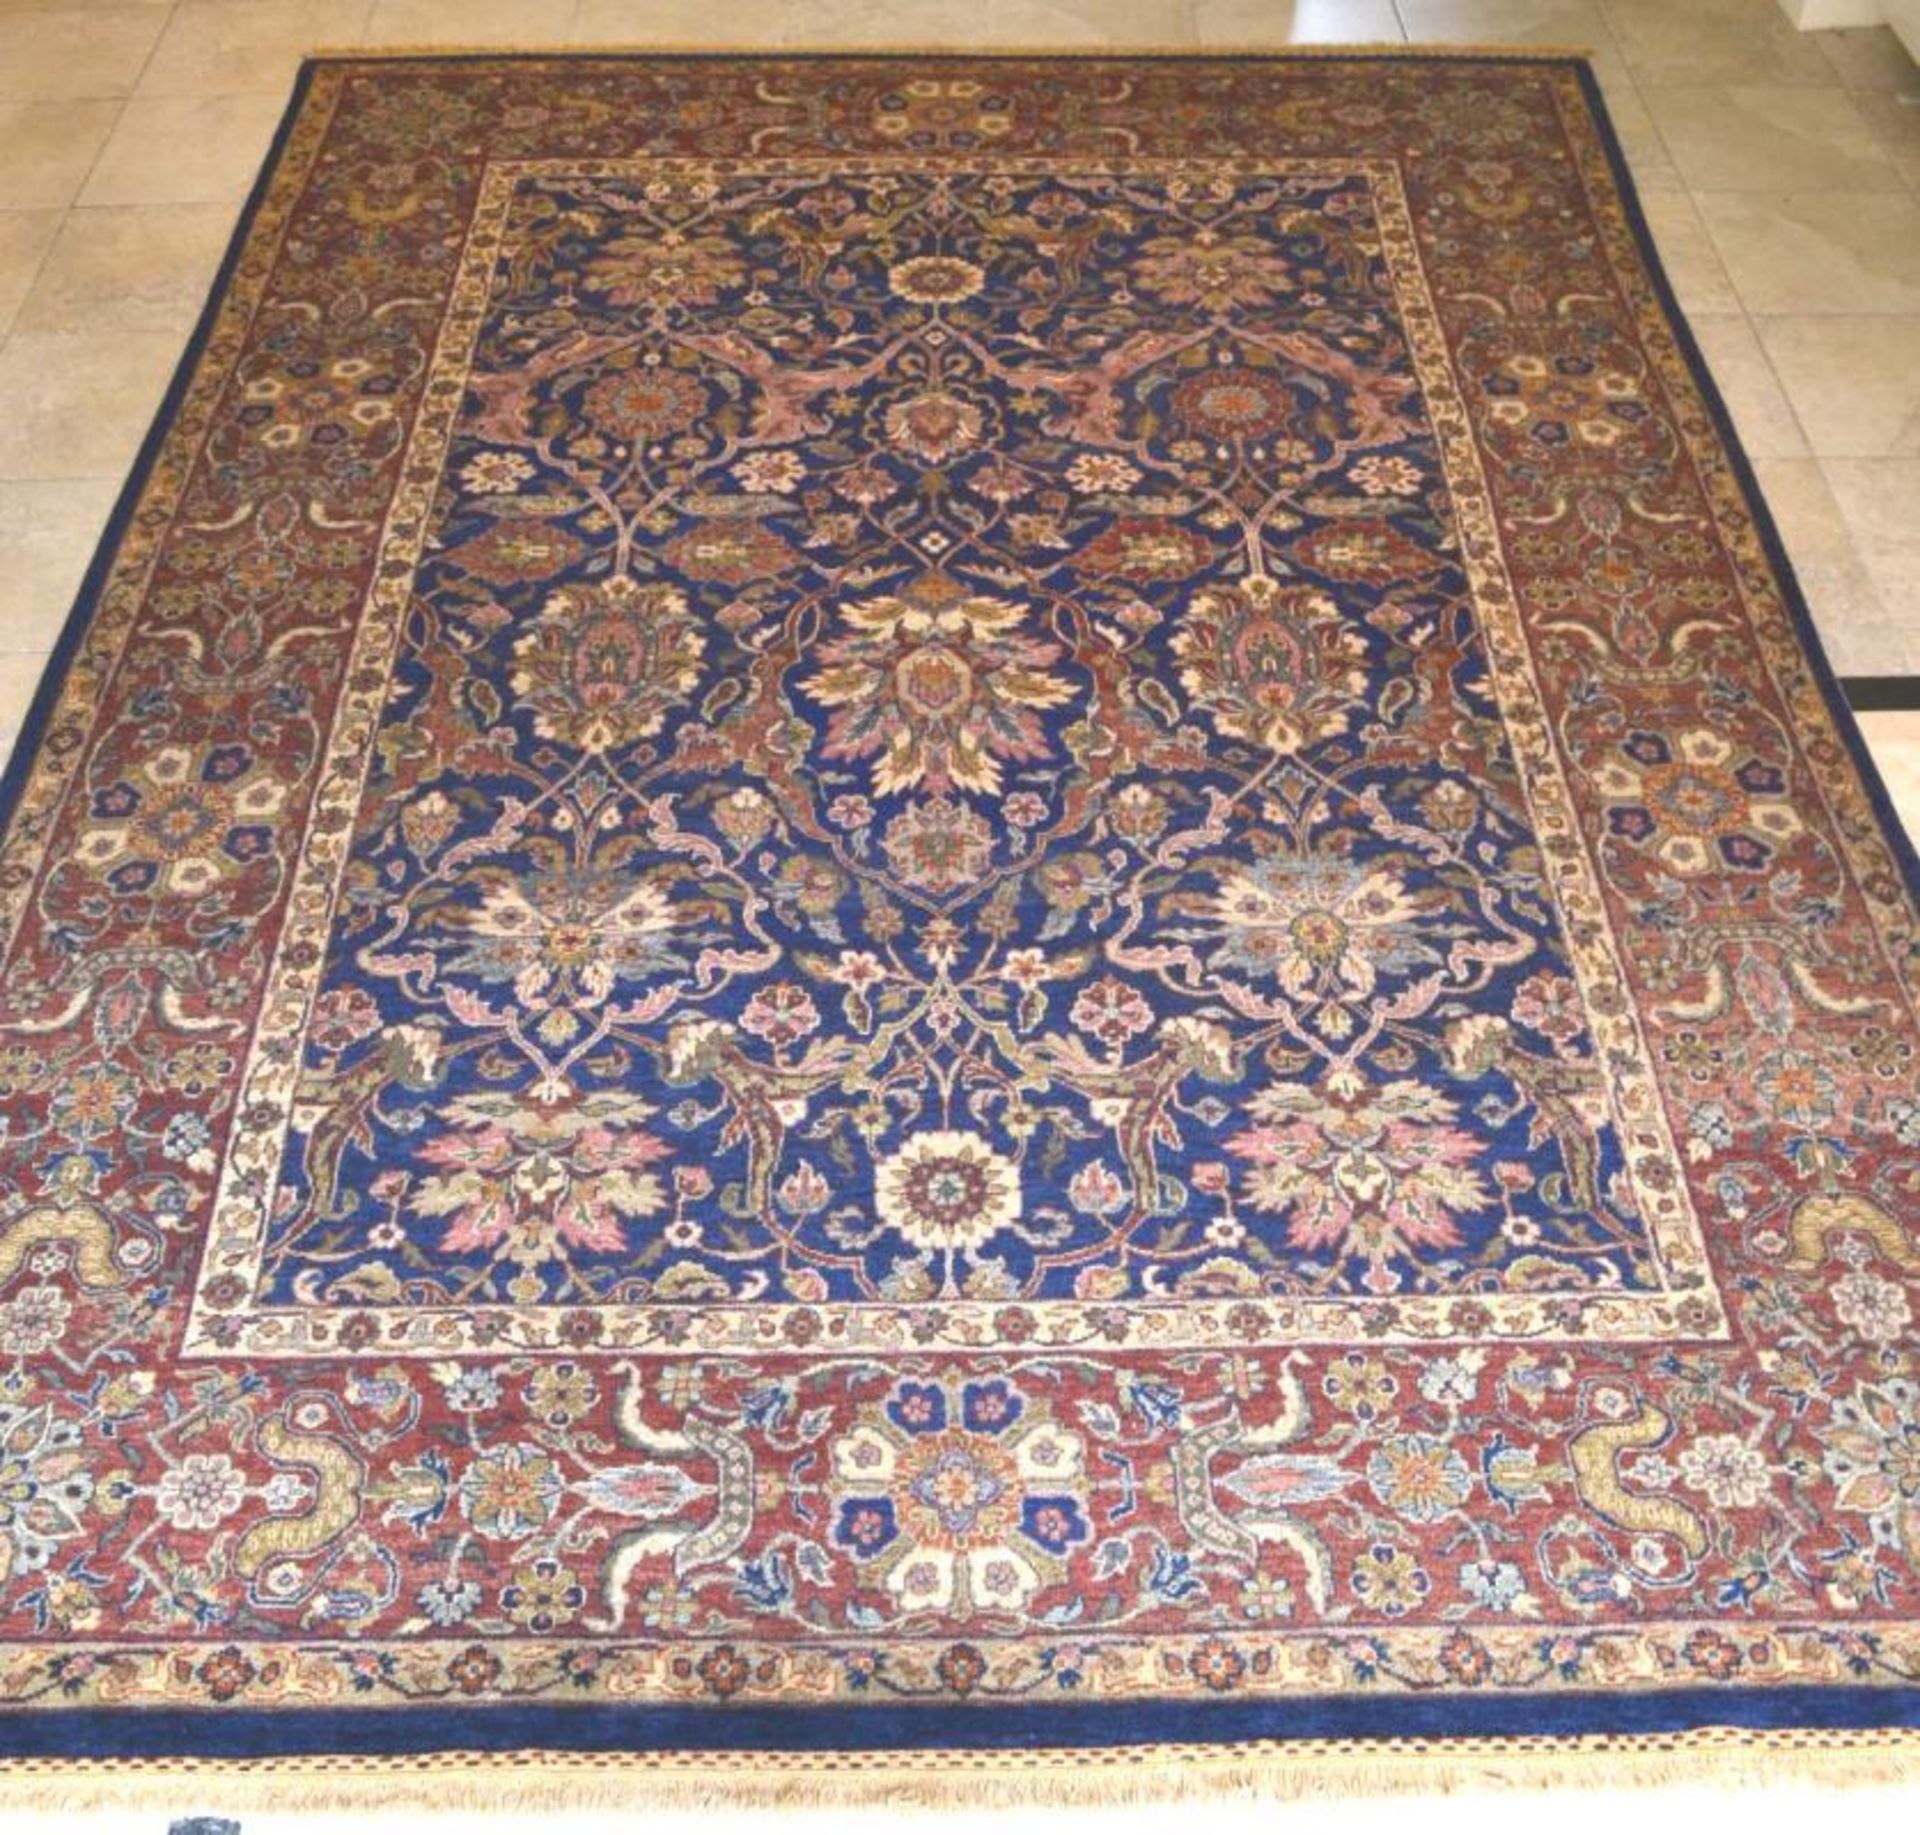 1 x Fine Indian Vegetable Dyed Handmade Carpet in Navy and Rust - All Wool With Cotton Foundation - - Image 9 of 22